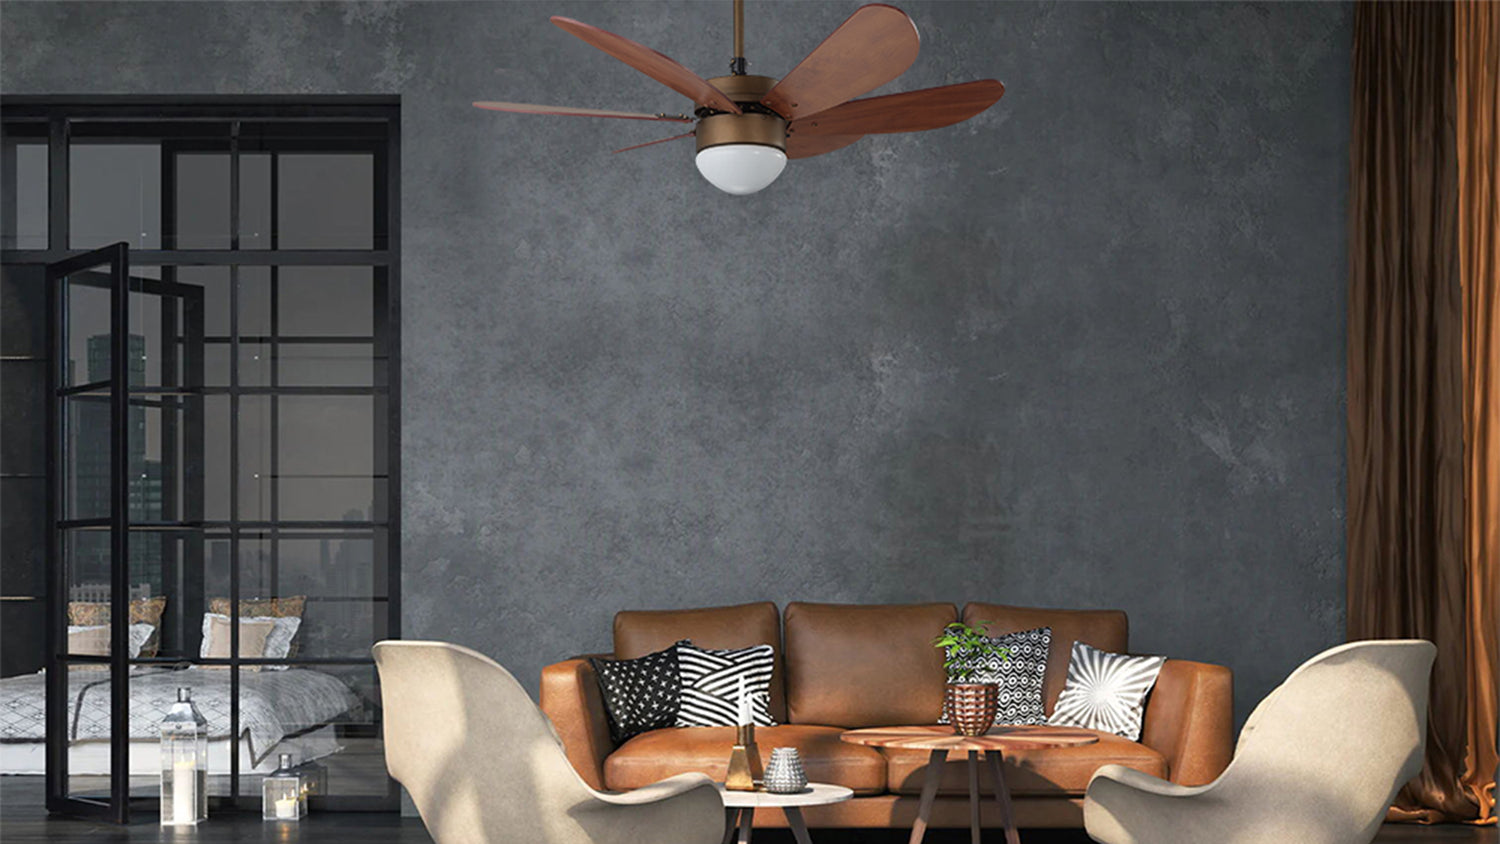 38 inch Ceiling Fans